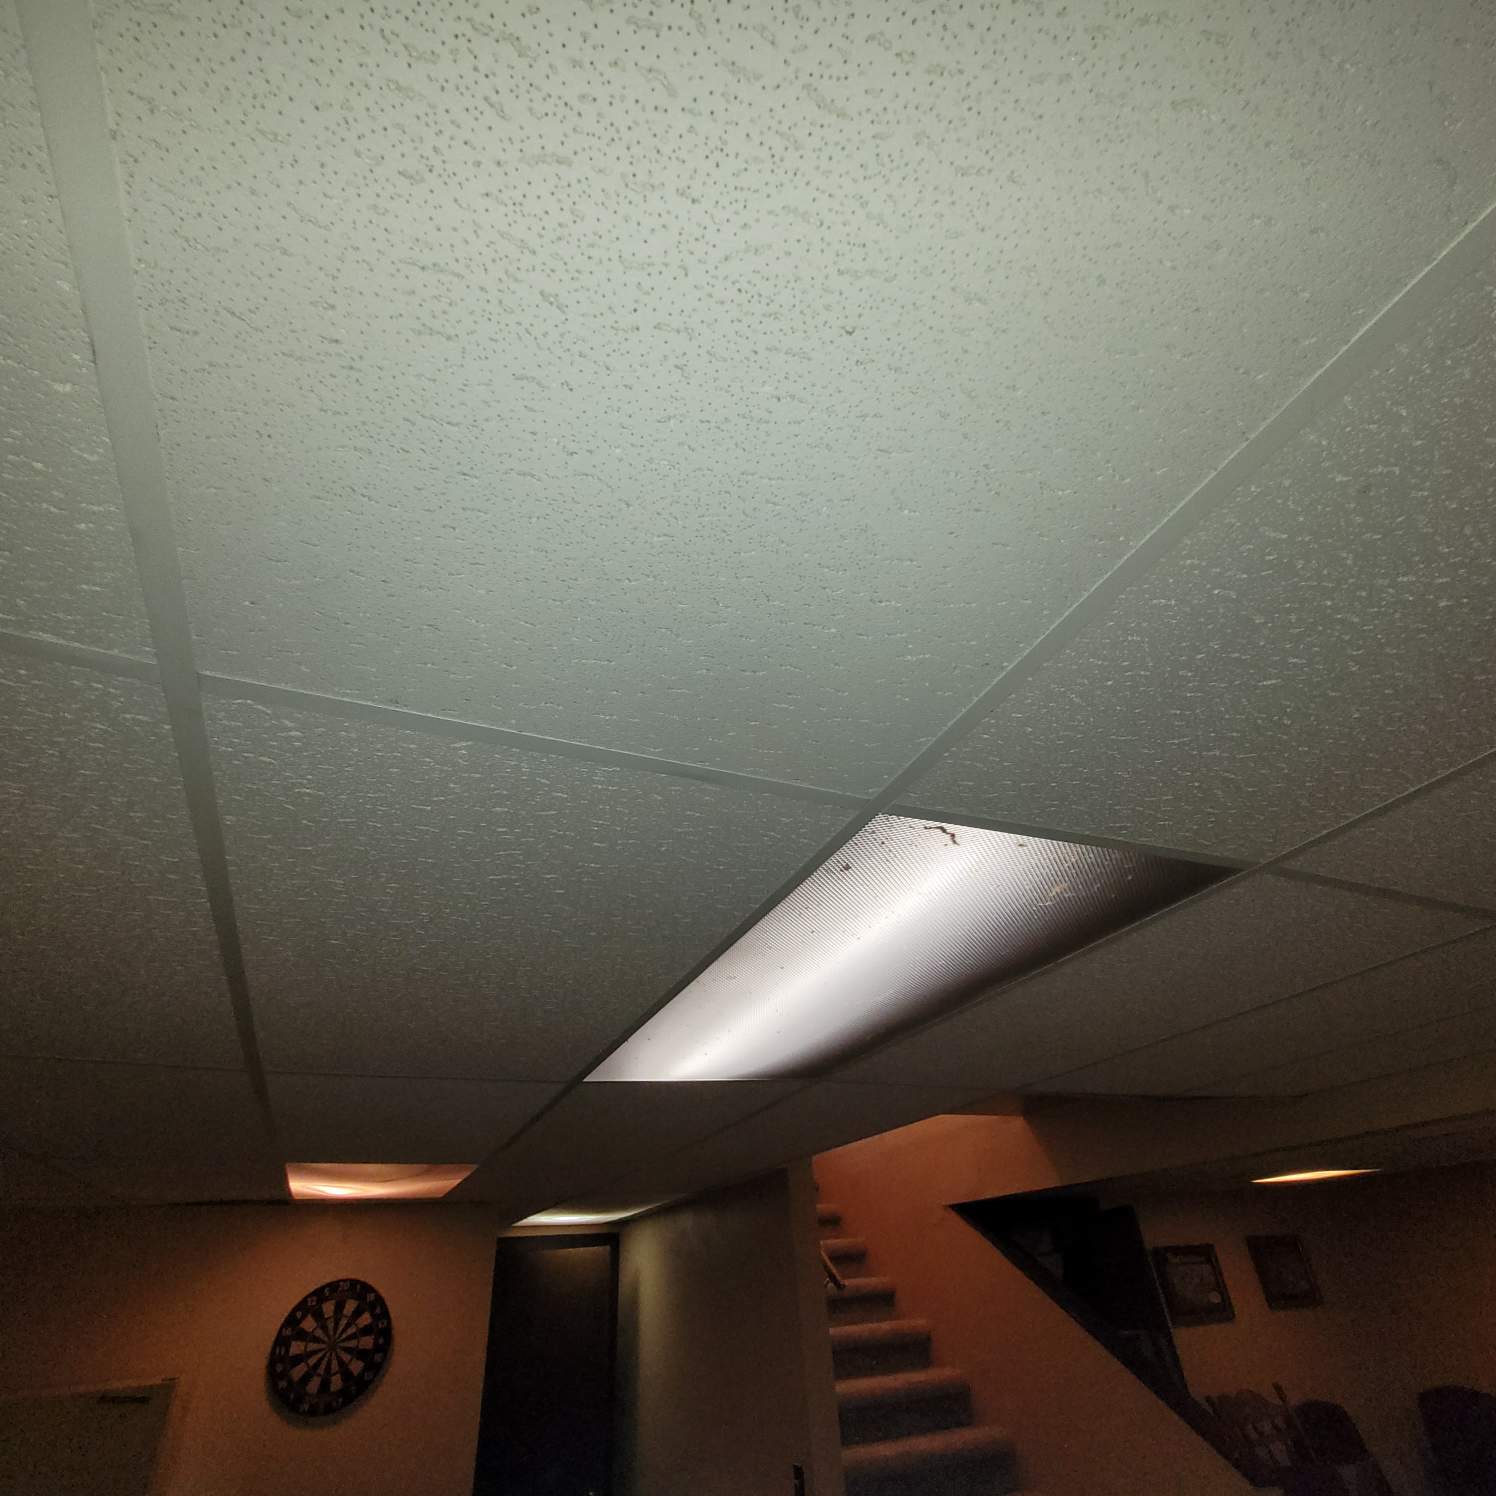 Basement with drop-down ceiling tiles and light fixtures.